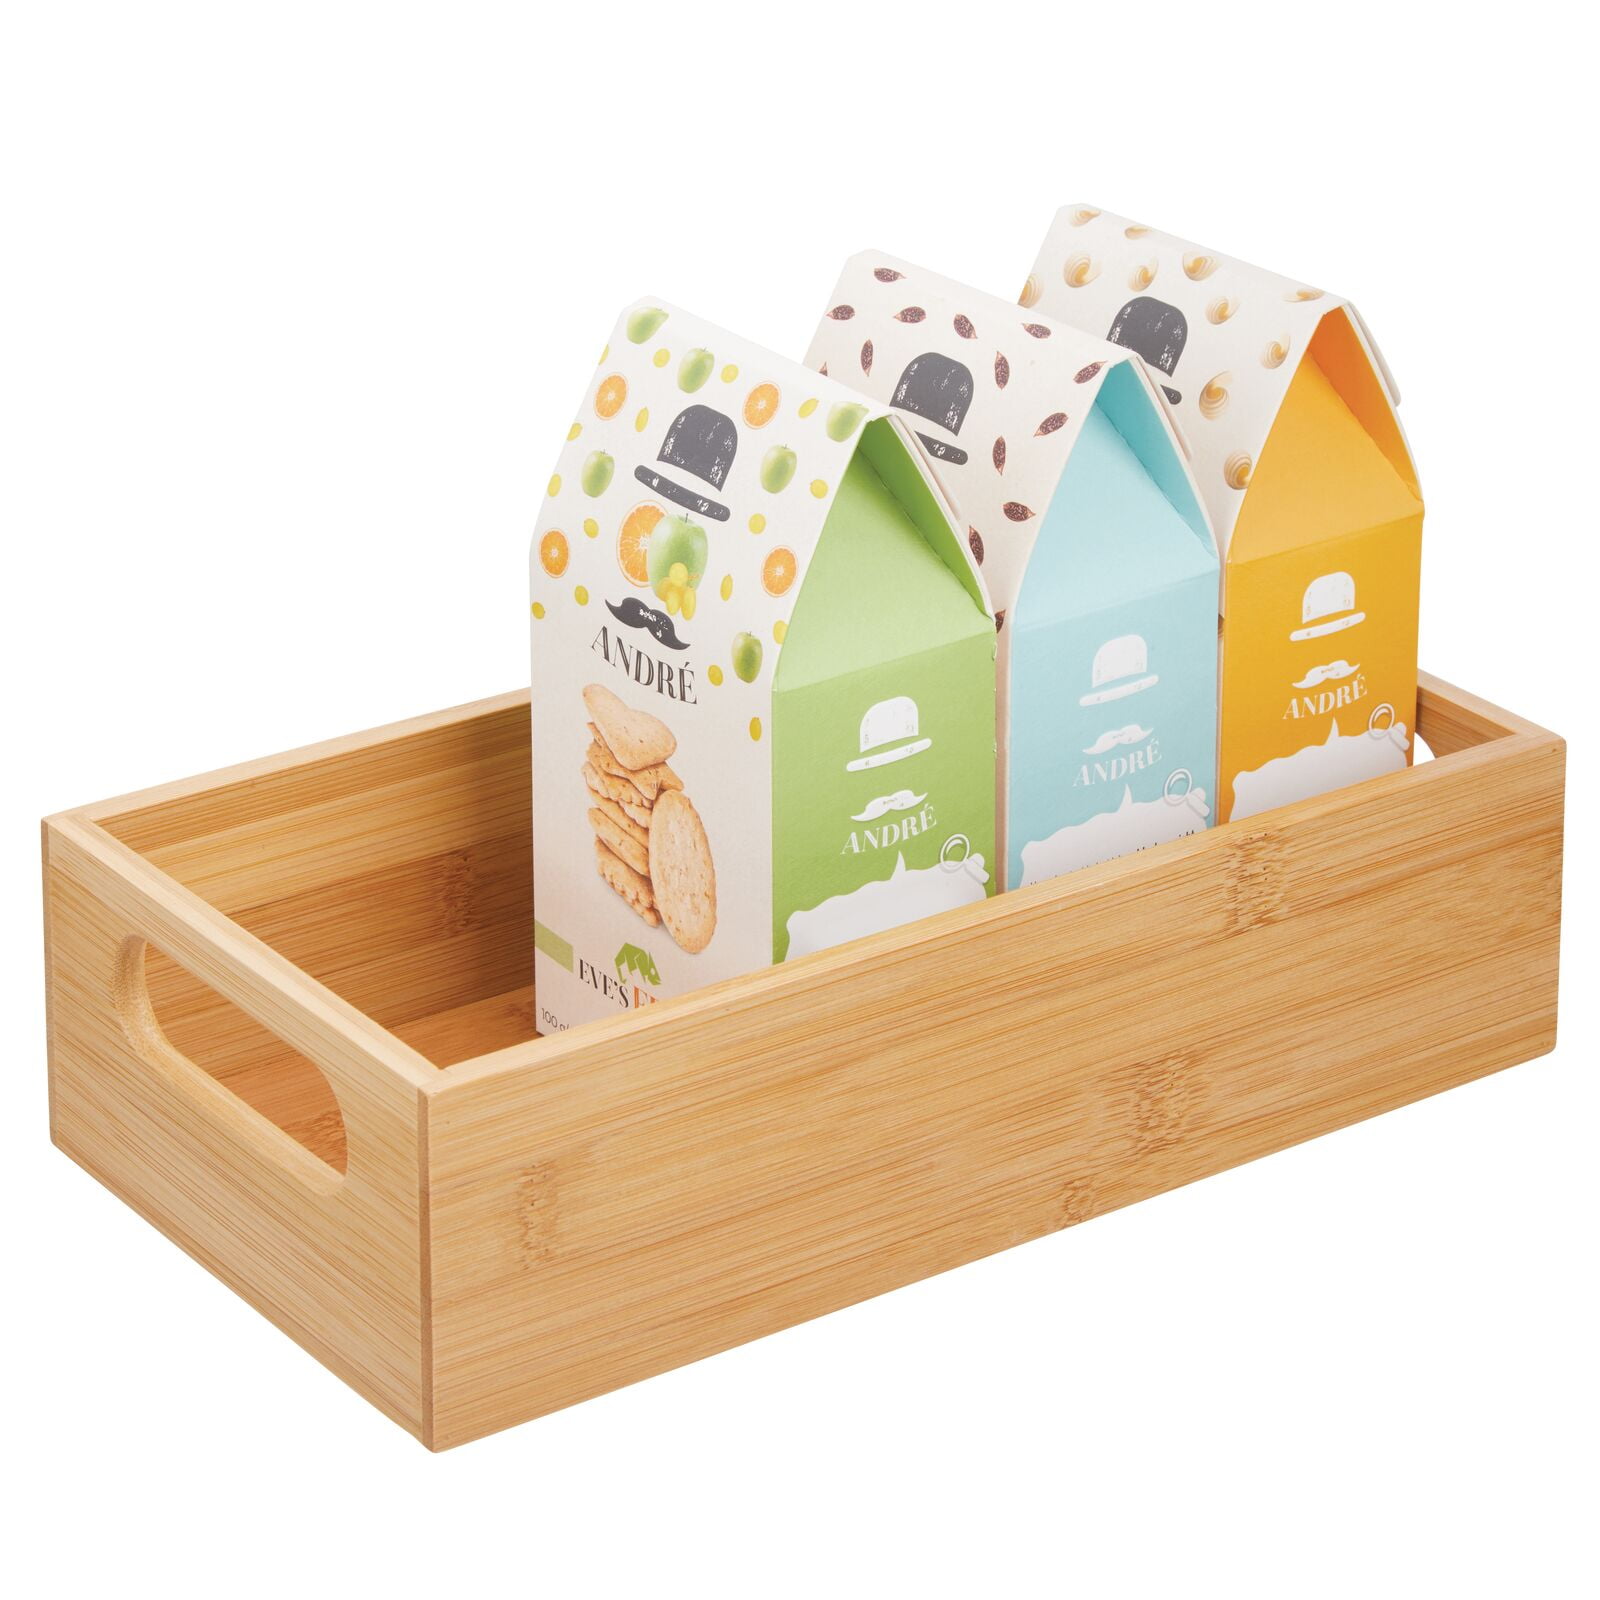 2 Pack Stackable Bamboo Wood Storage Bins, Organization Boxes for Kitchen  Pantry (2 Sizes) 